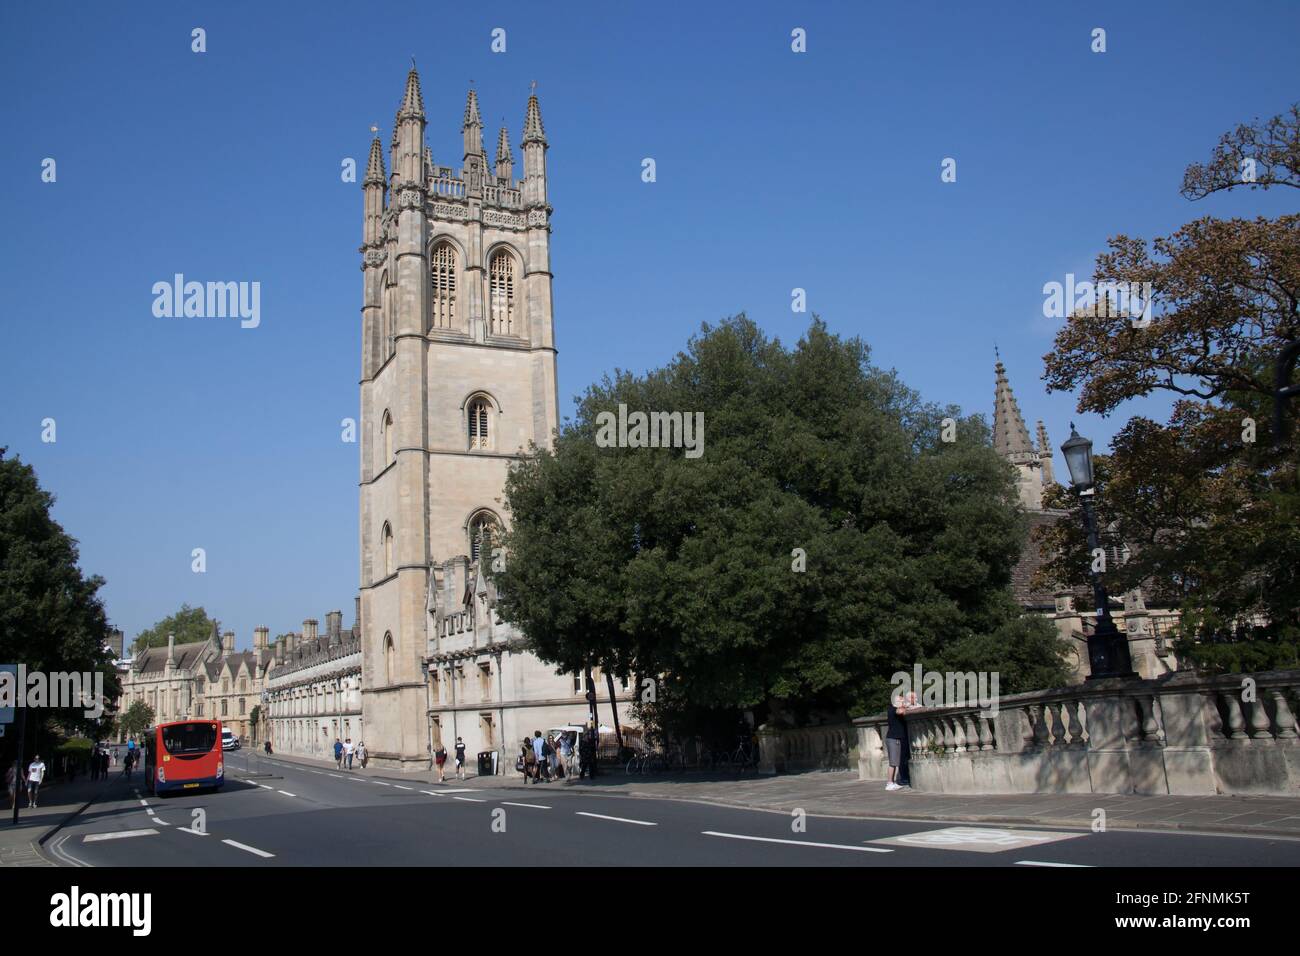 Views of Magdalen College and Magdalen Bridge in Oxford in the UK, taken on the 15th of September 2020 Stock Photo